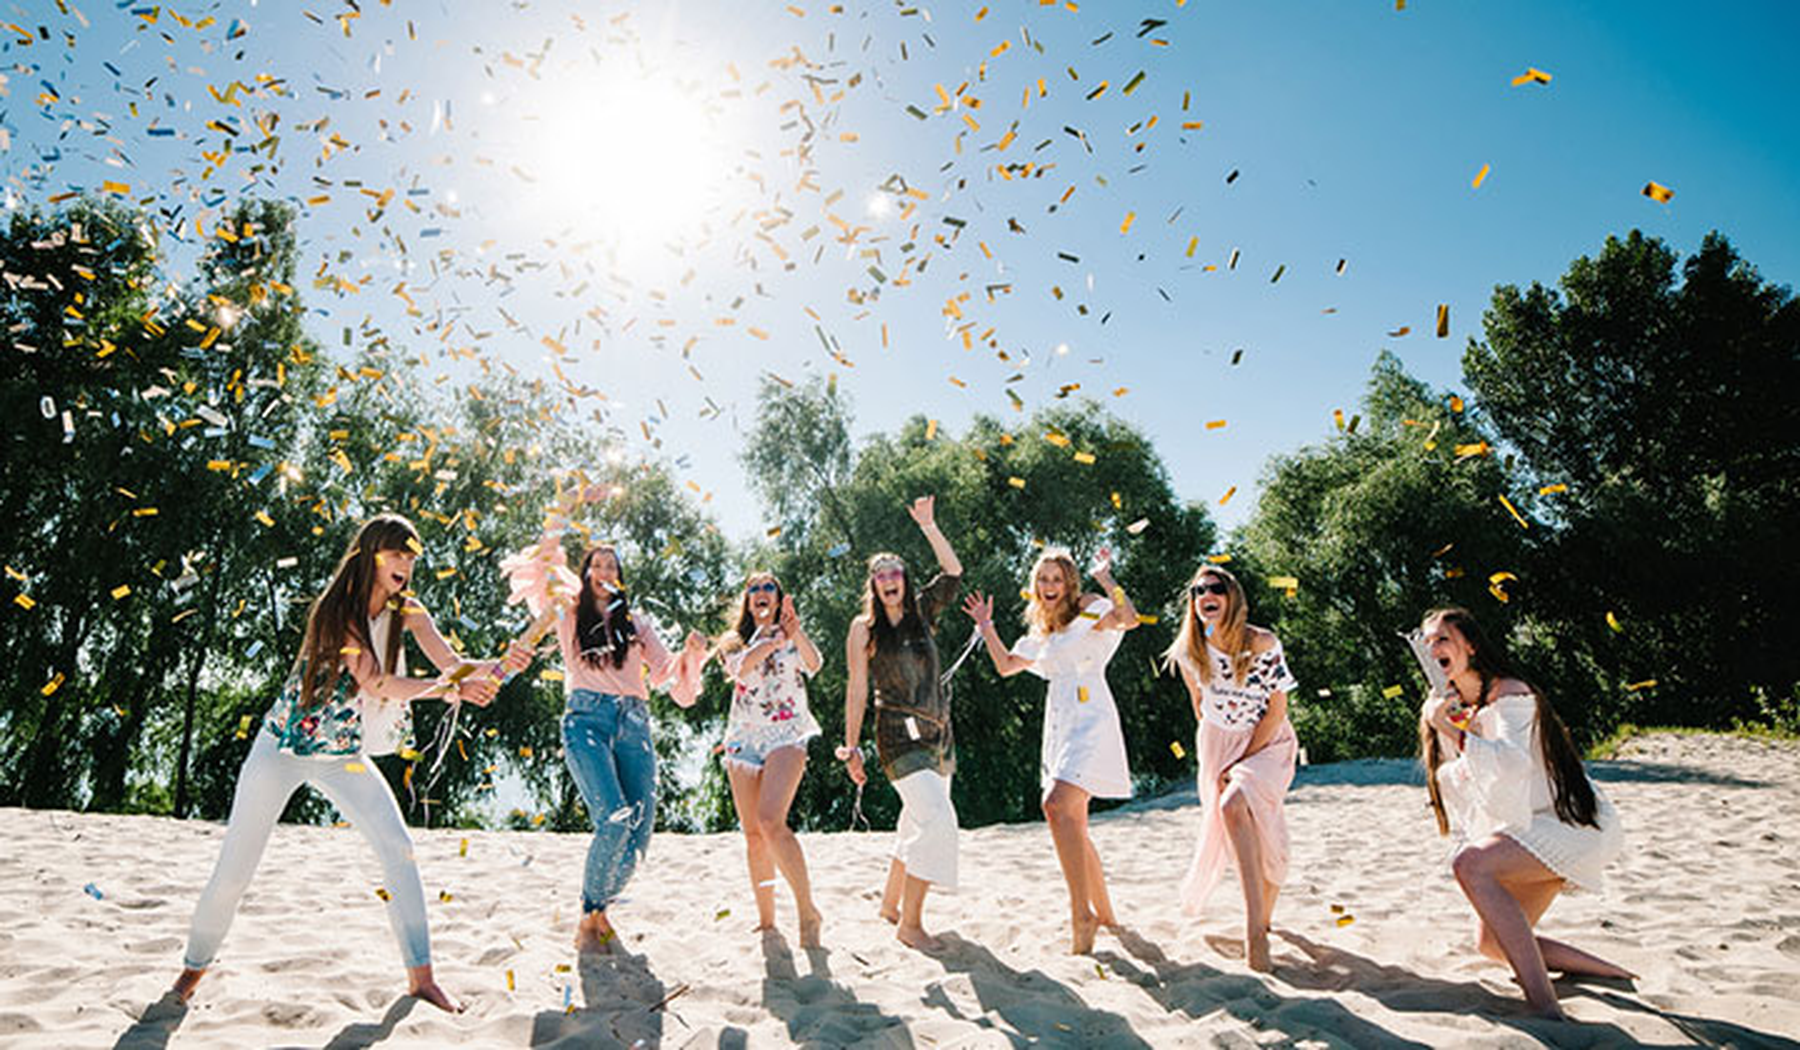 Young women throwing confetti on the beach